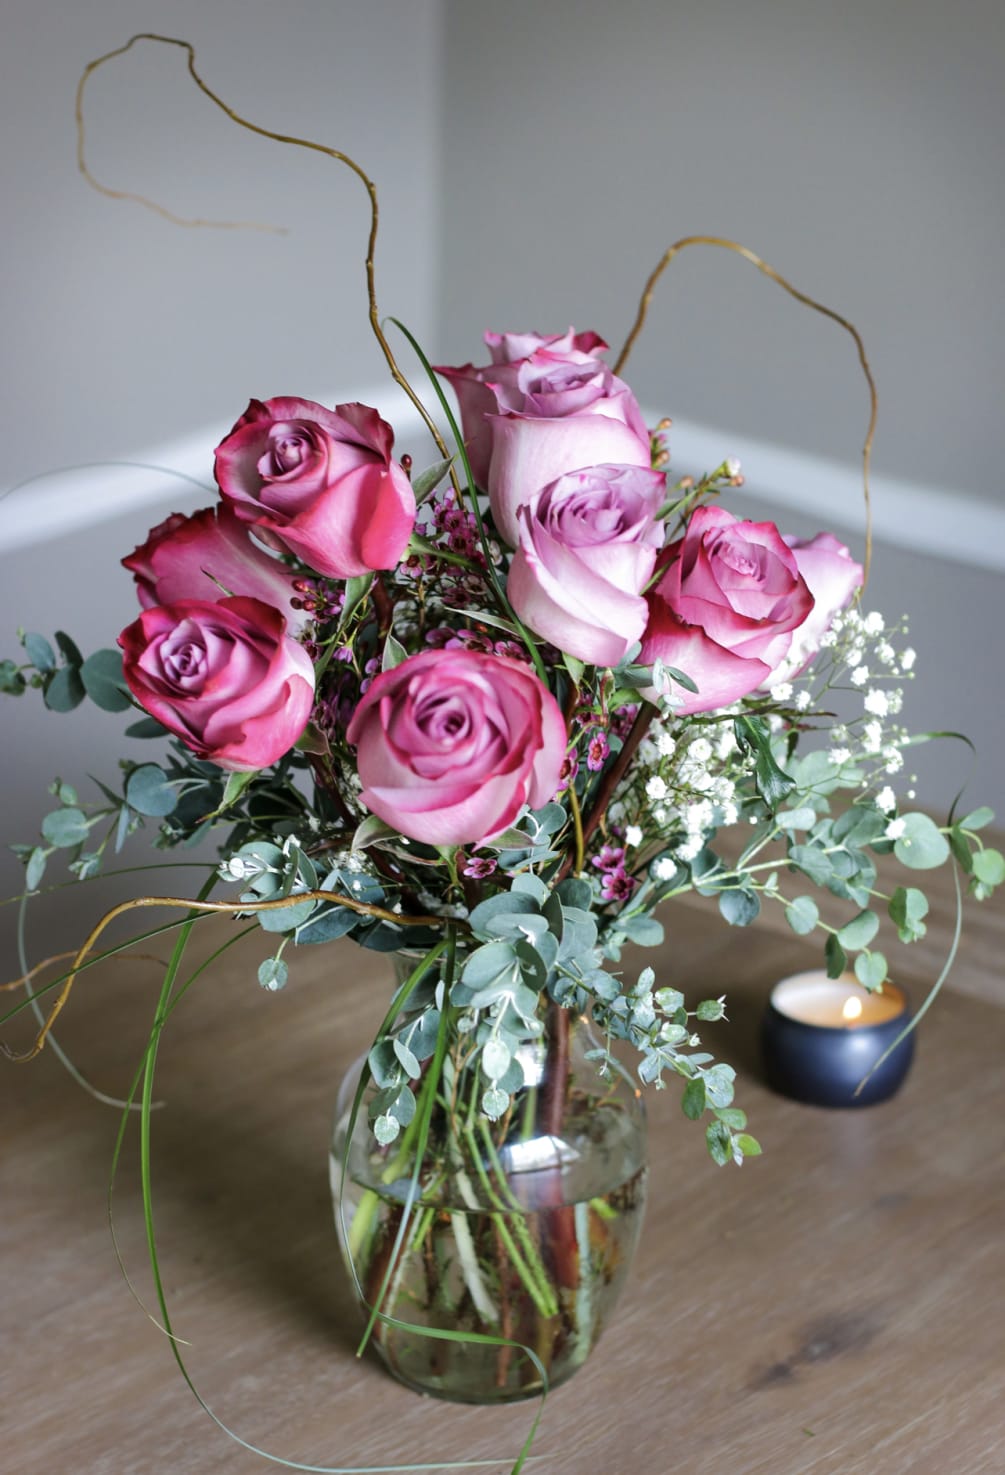 What a gorgeous combination of two toned pink/ purple roses surrounded by